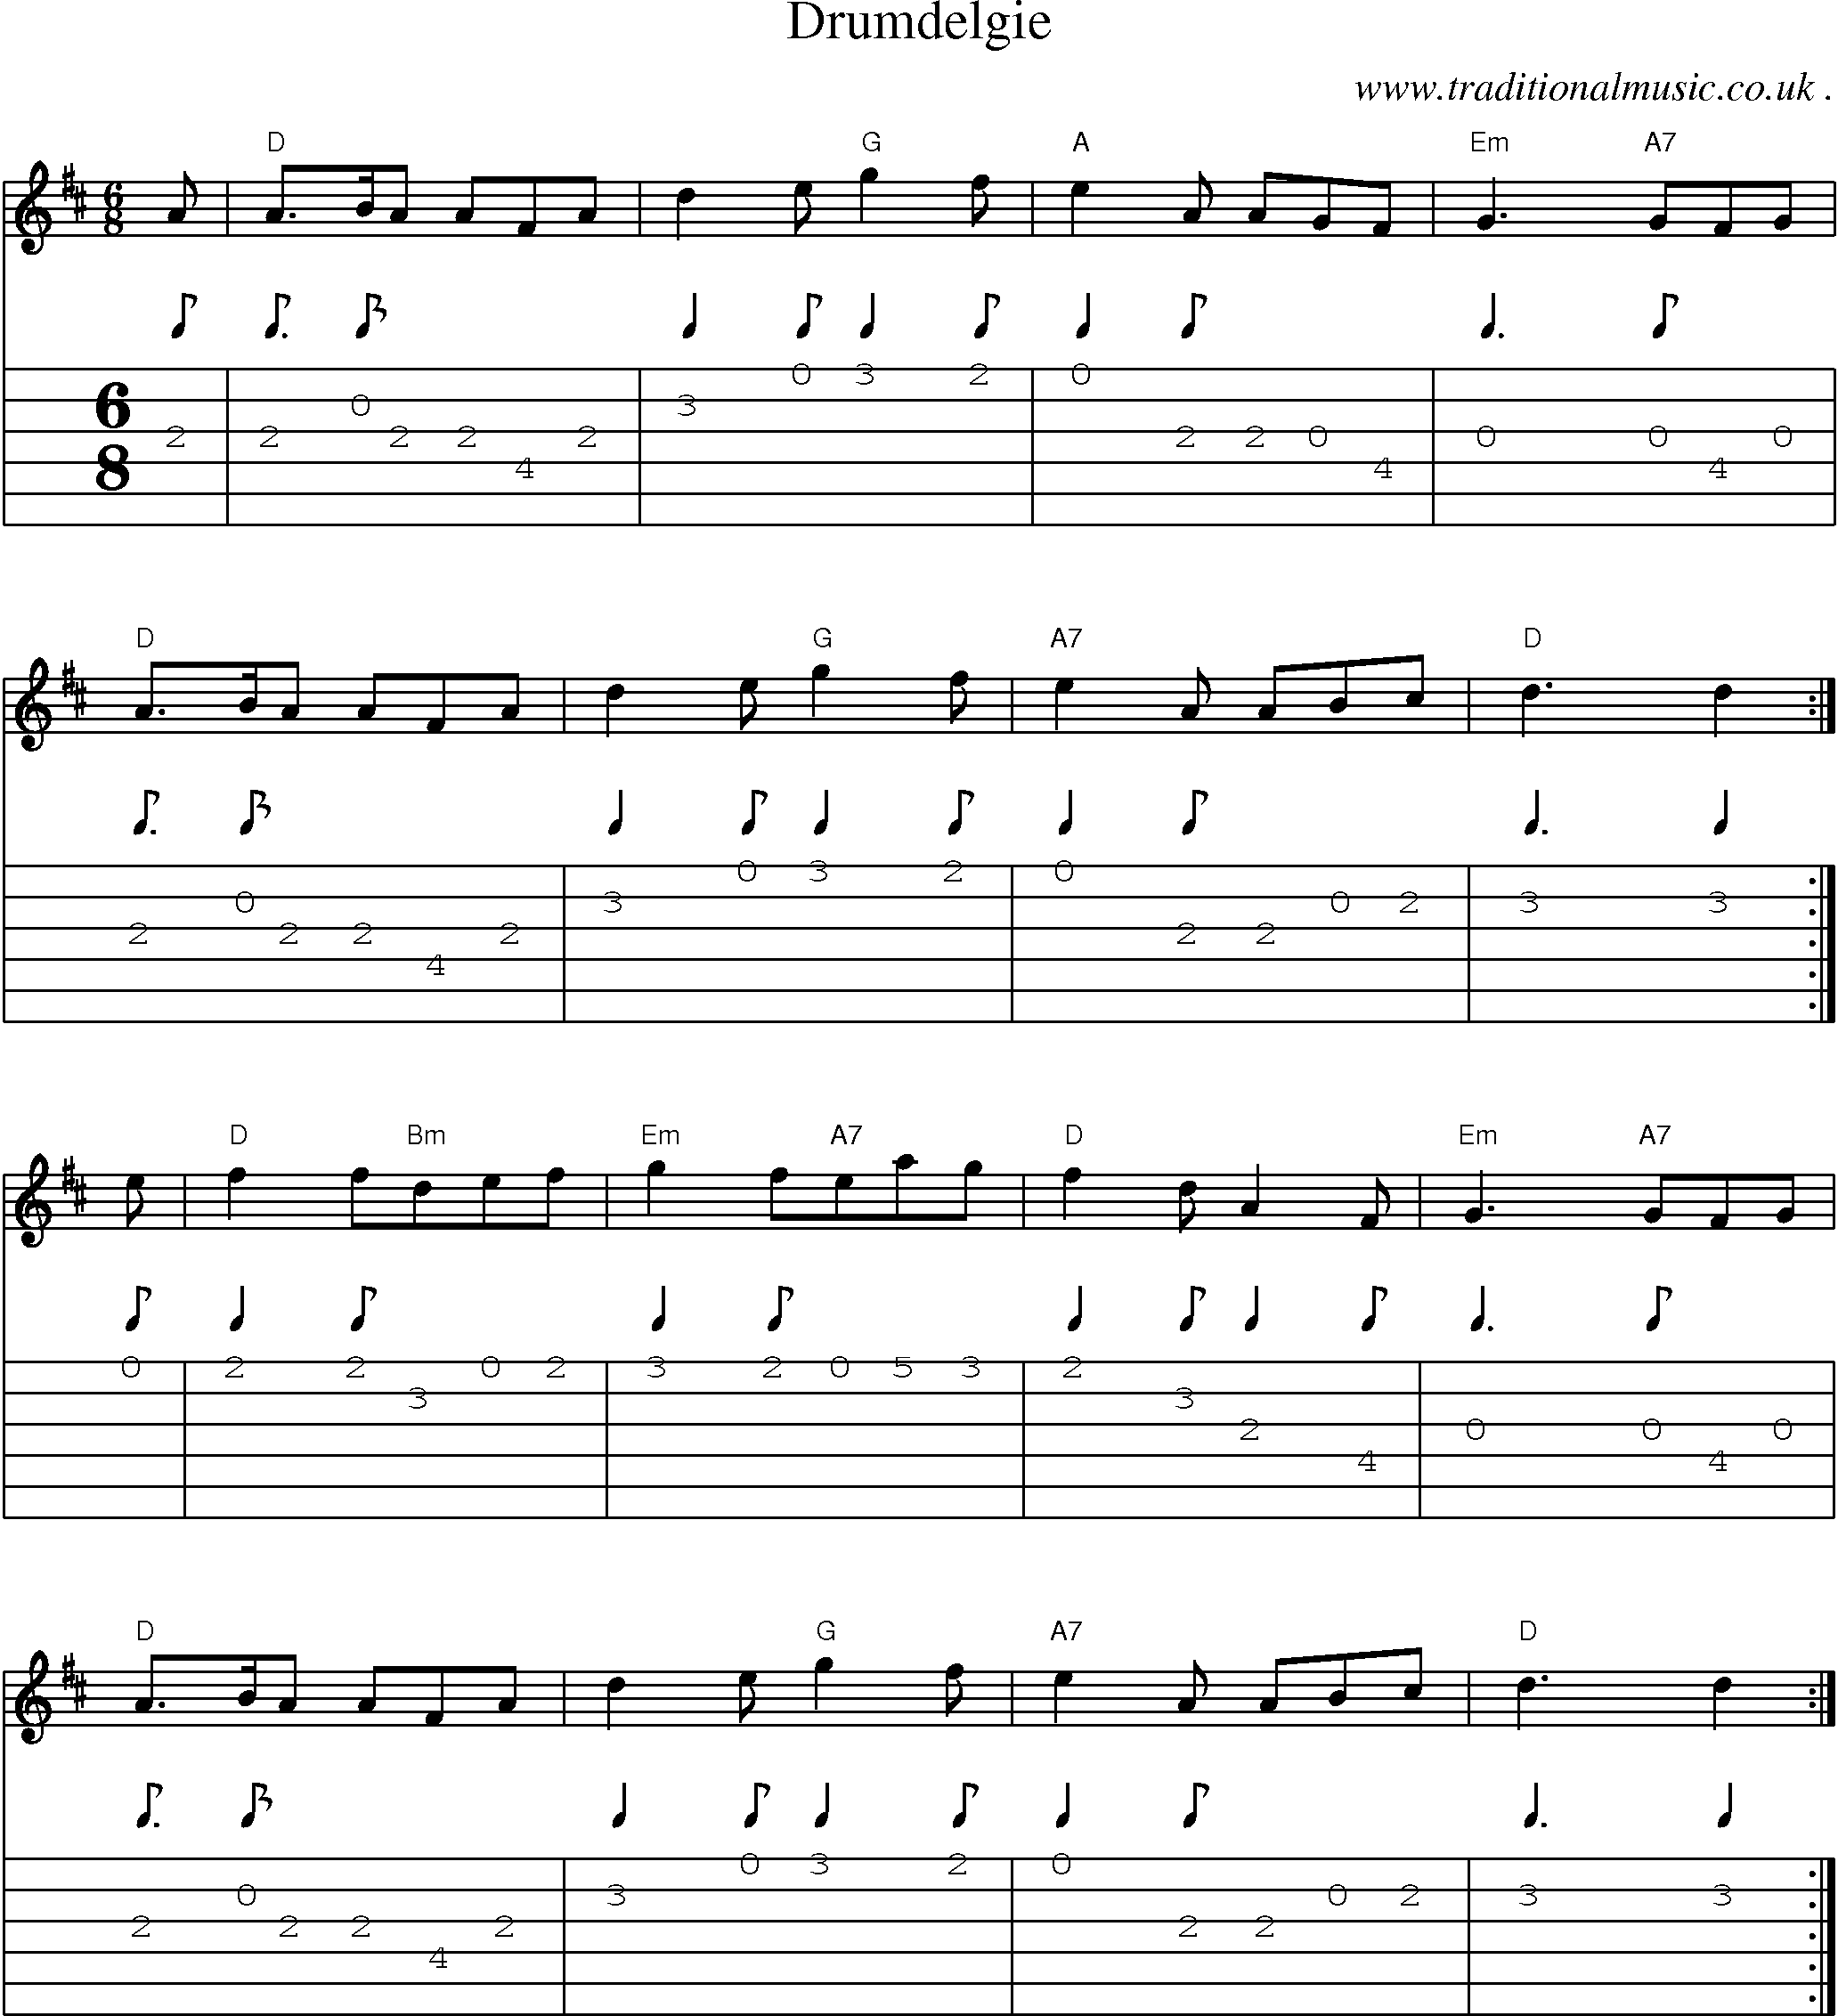 Sheet-Music and Guitar Tabs for Drumdelgie